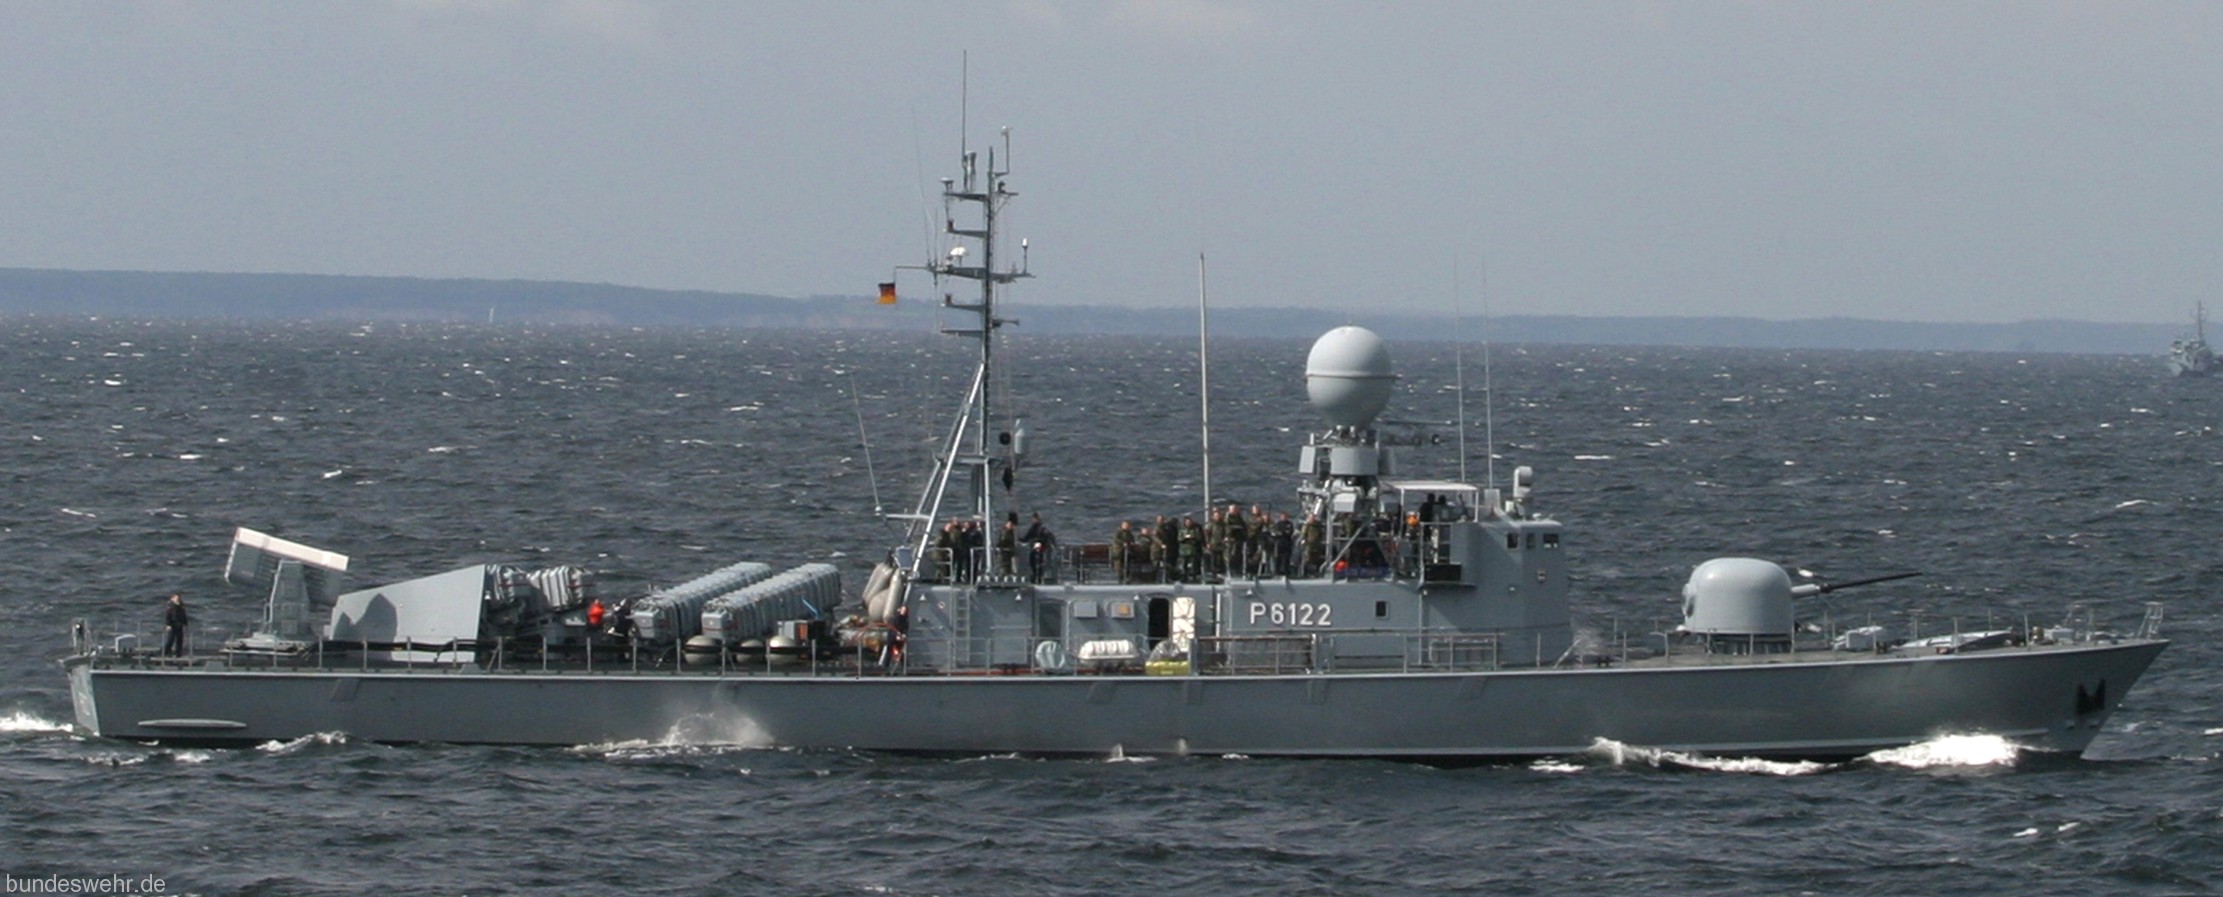 p6122 s72 fgs puma type 143a gepard class fast attack missile craft german navy 04